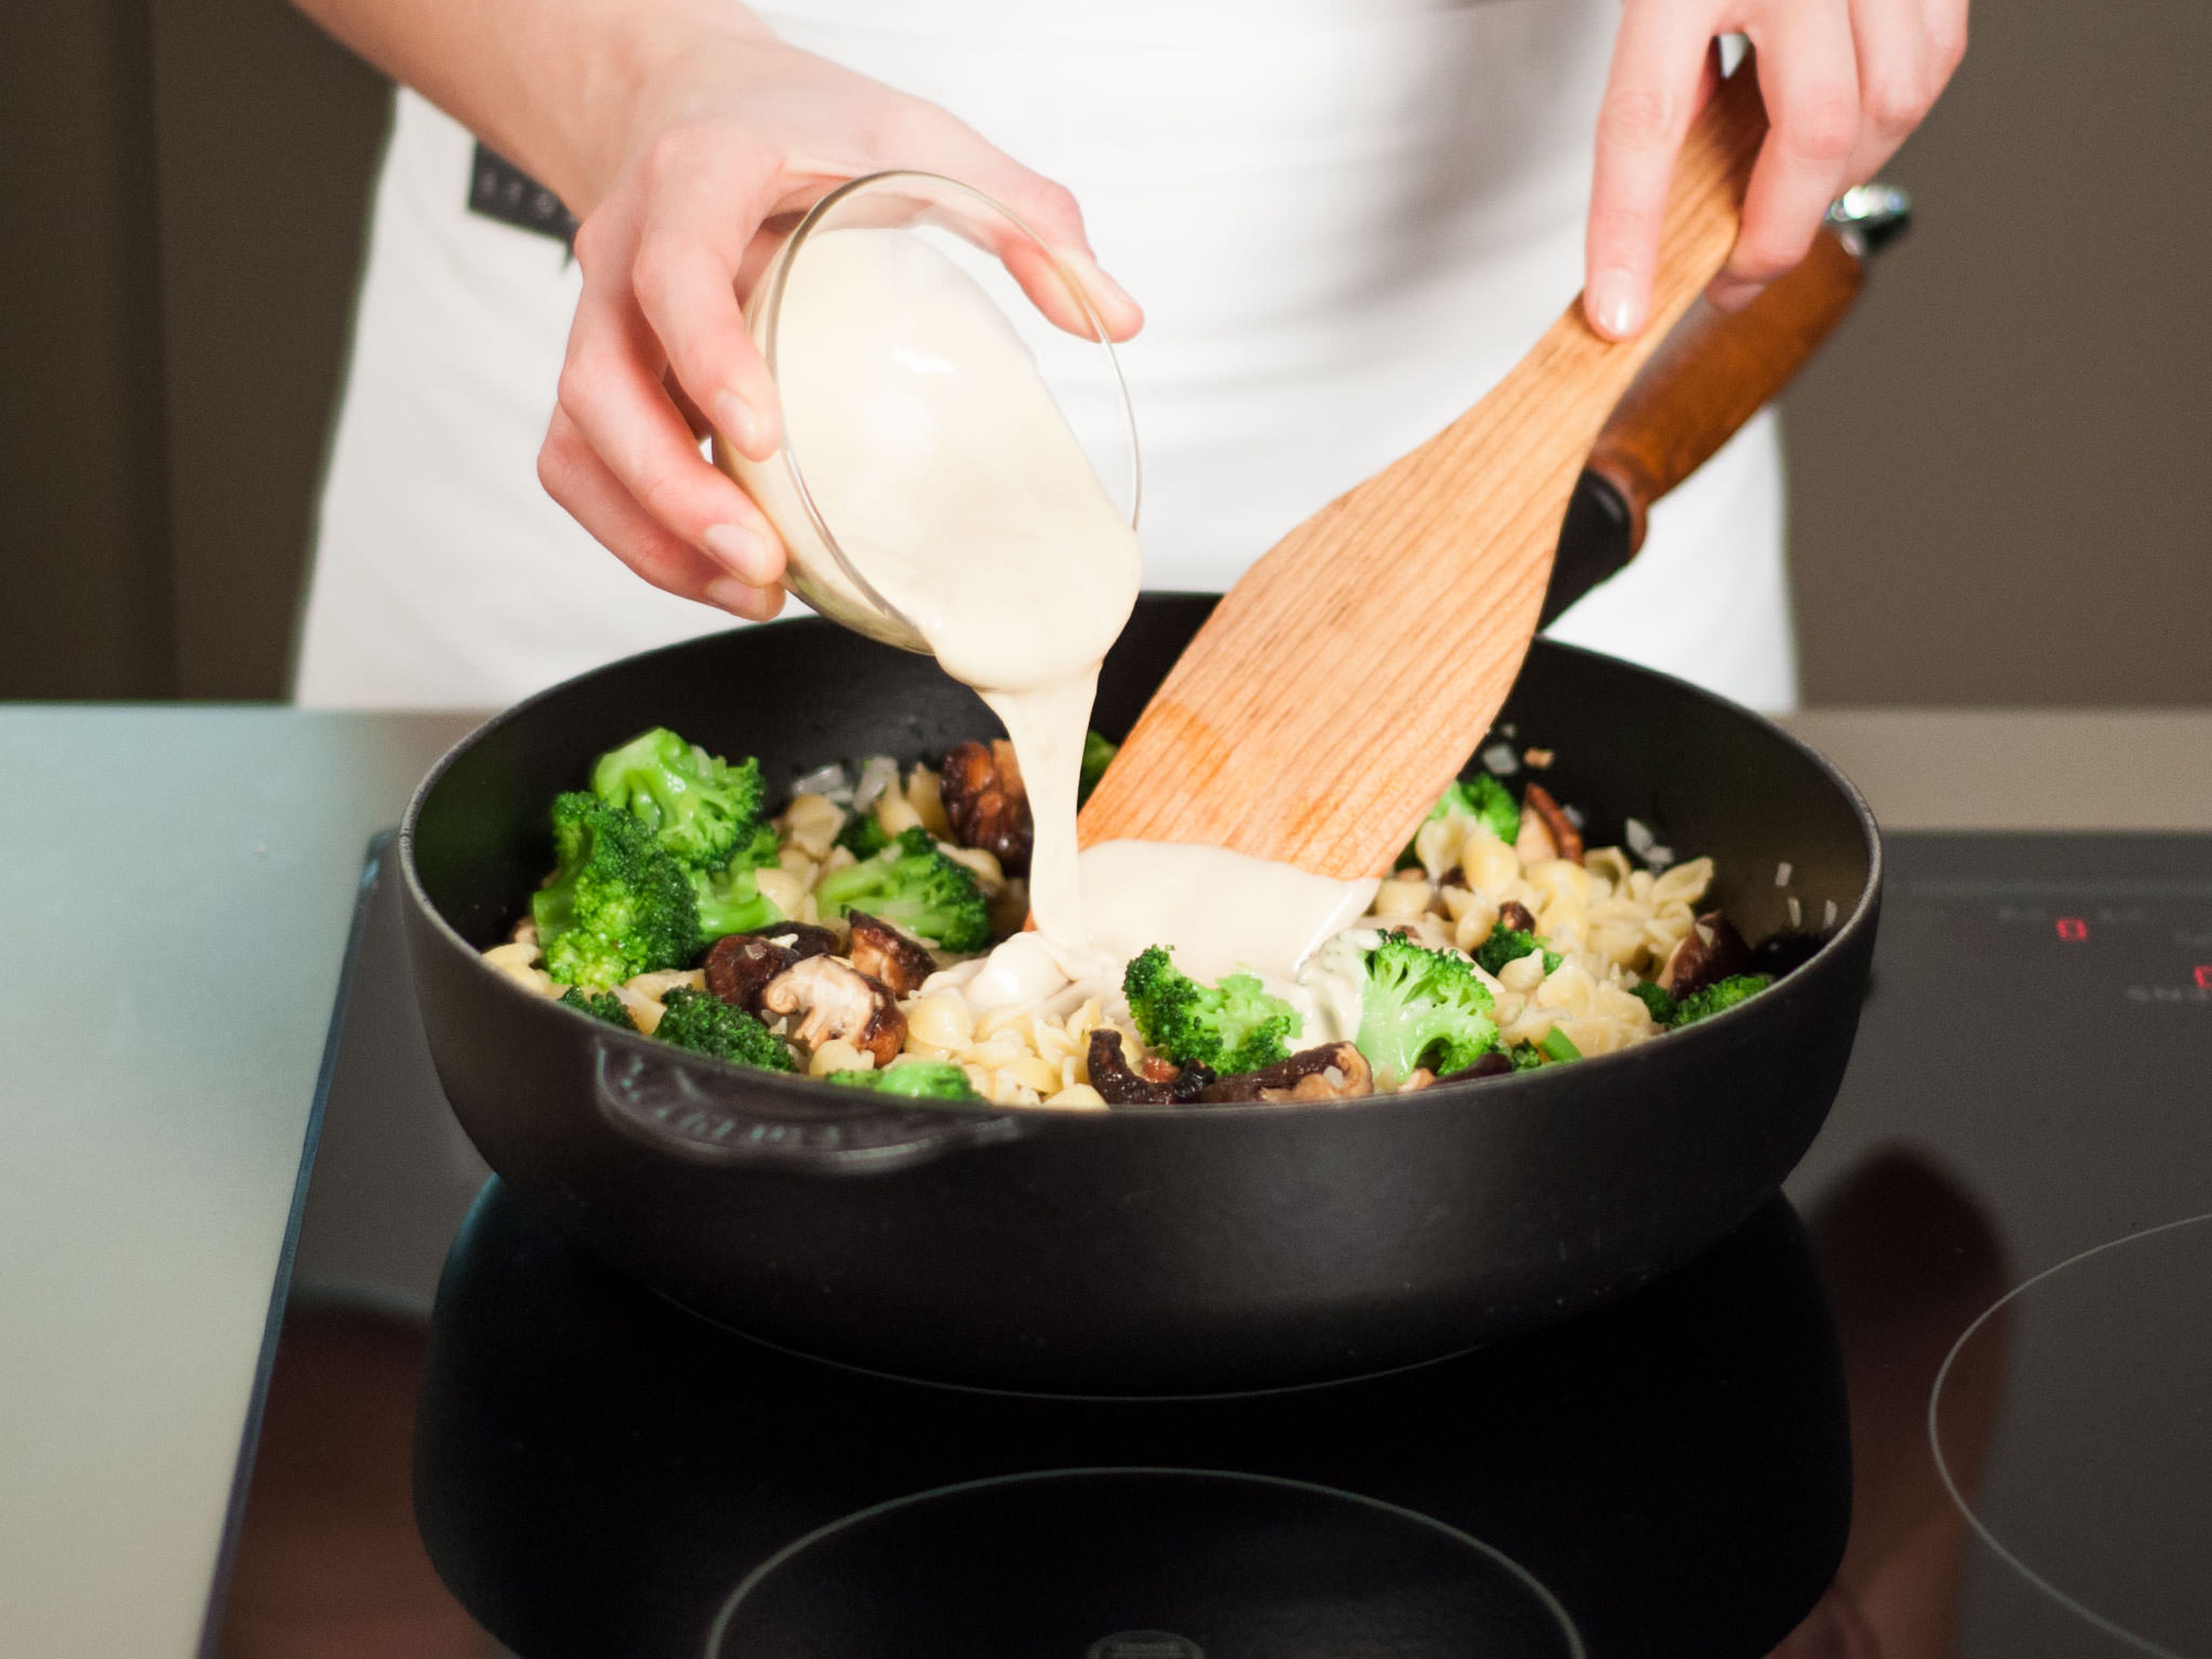 Add the sauce to the pan, stir well to combine, and continue to sauté for approx. 1 – 2 min. until hot.